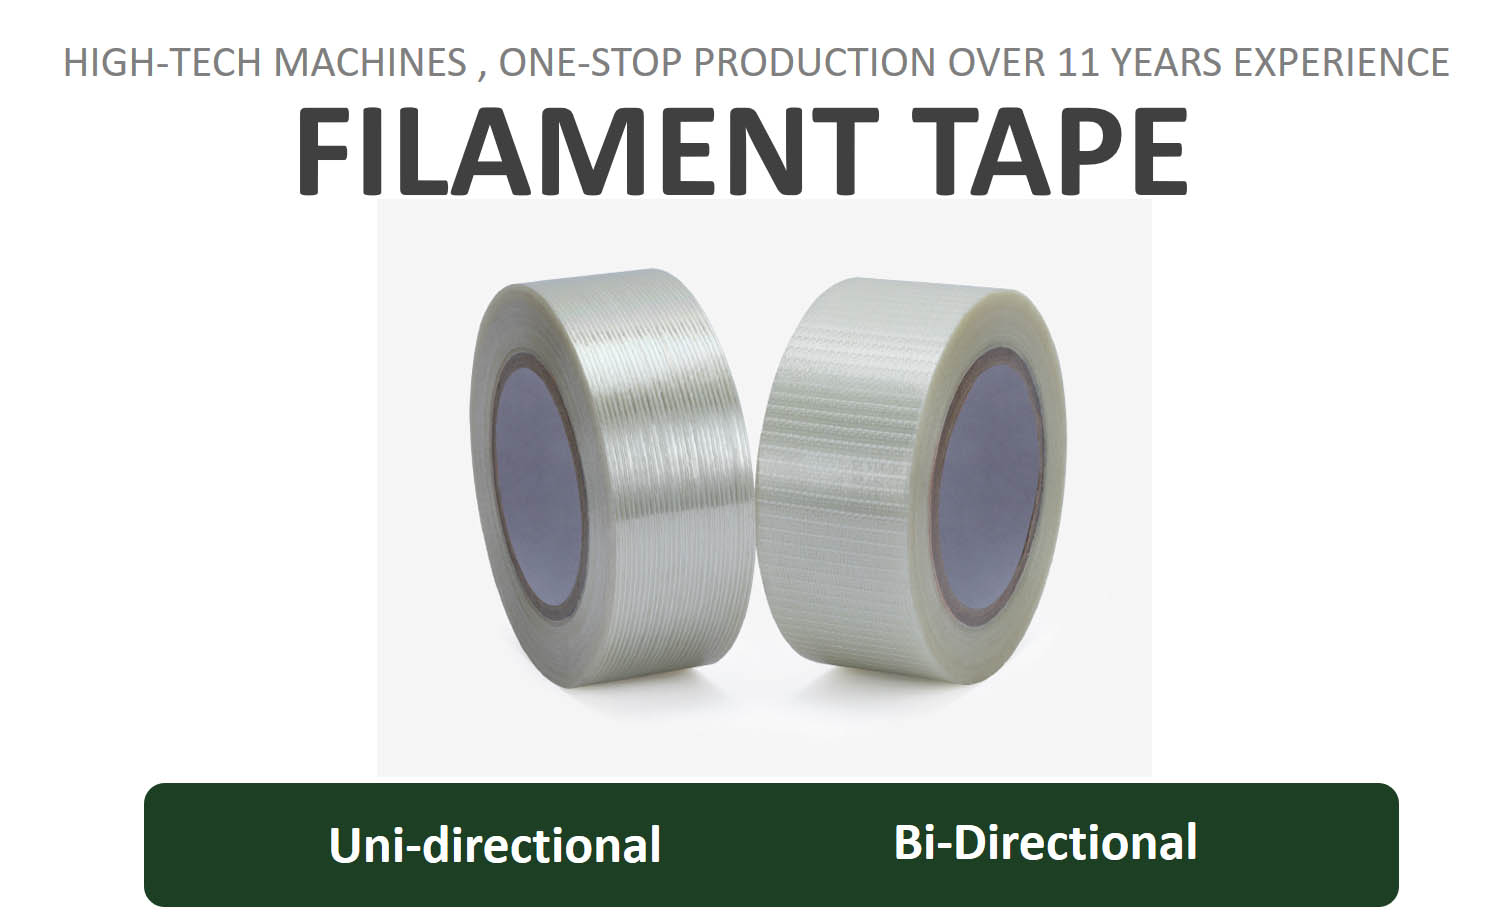 What is Filament Tape?